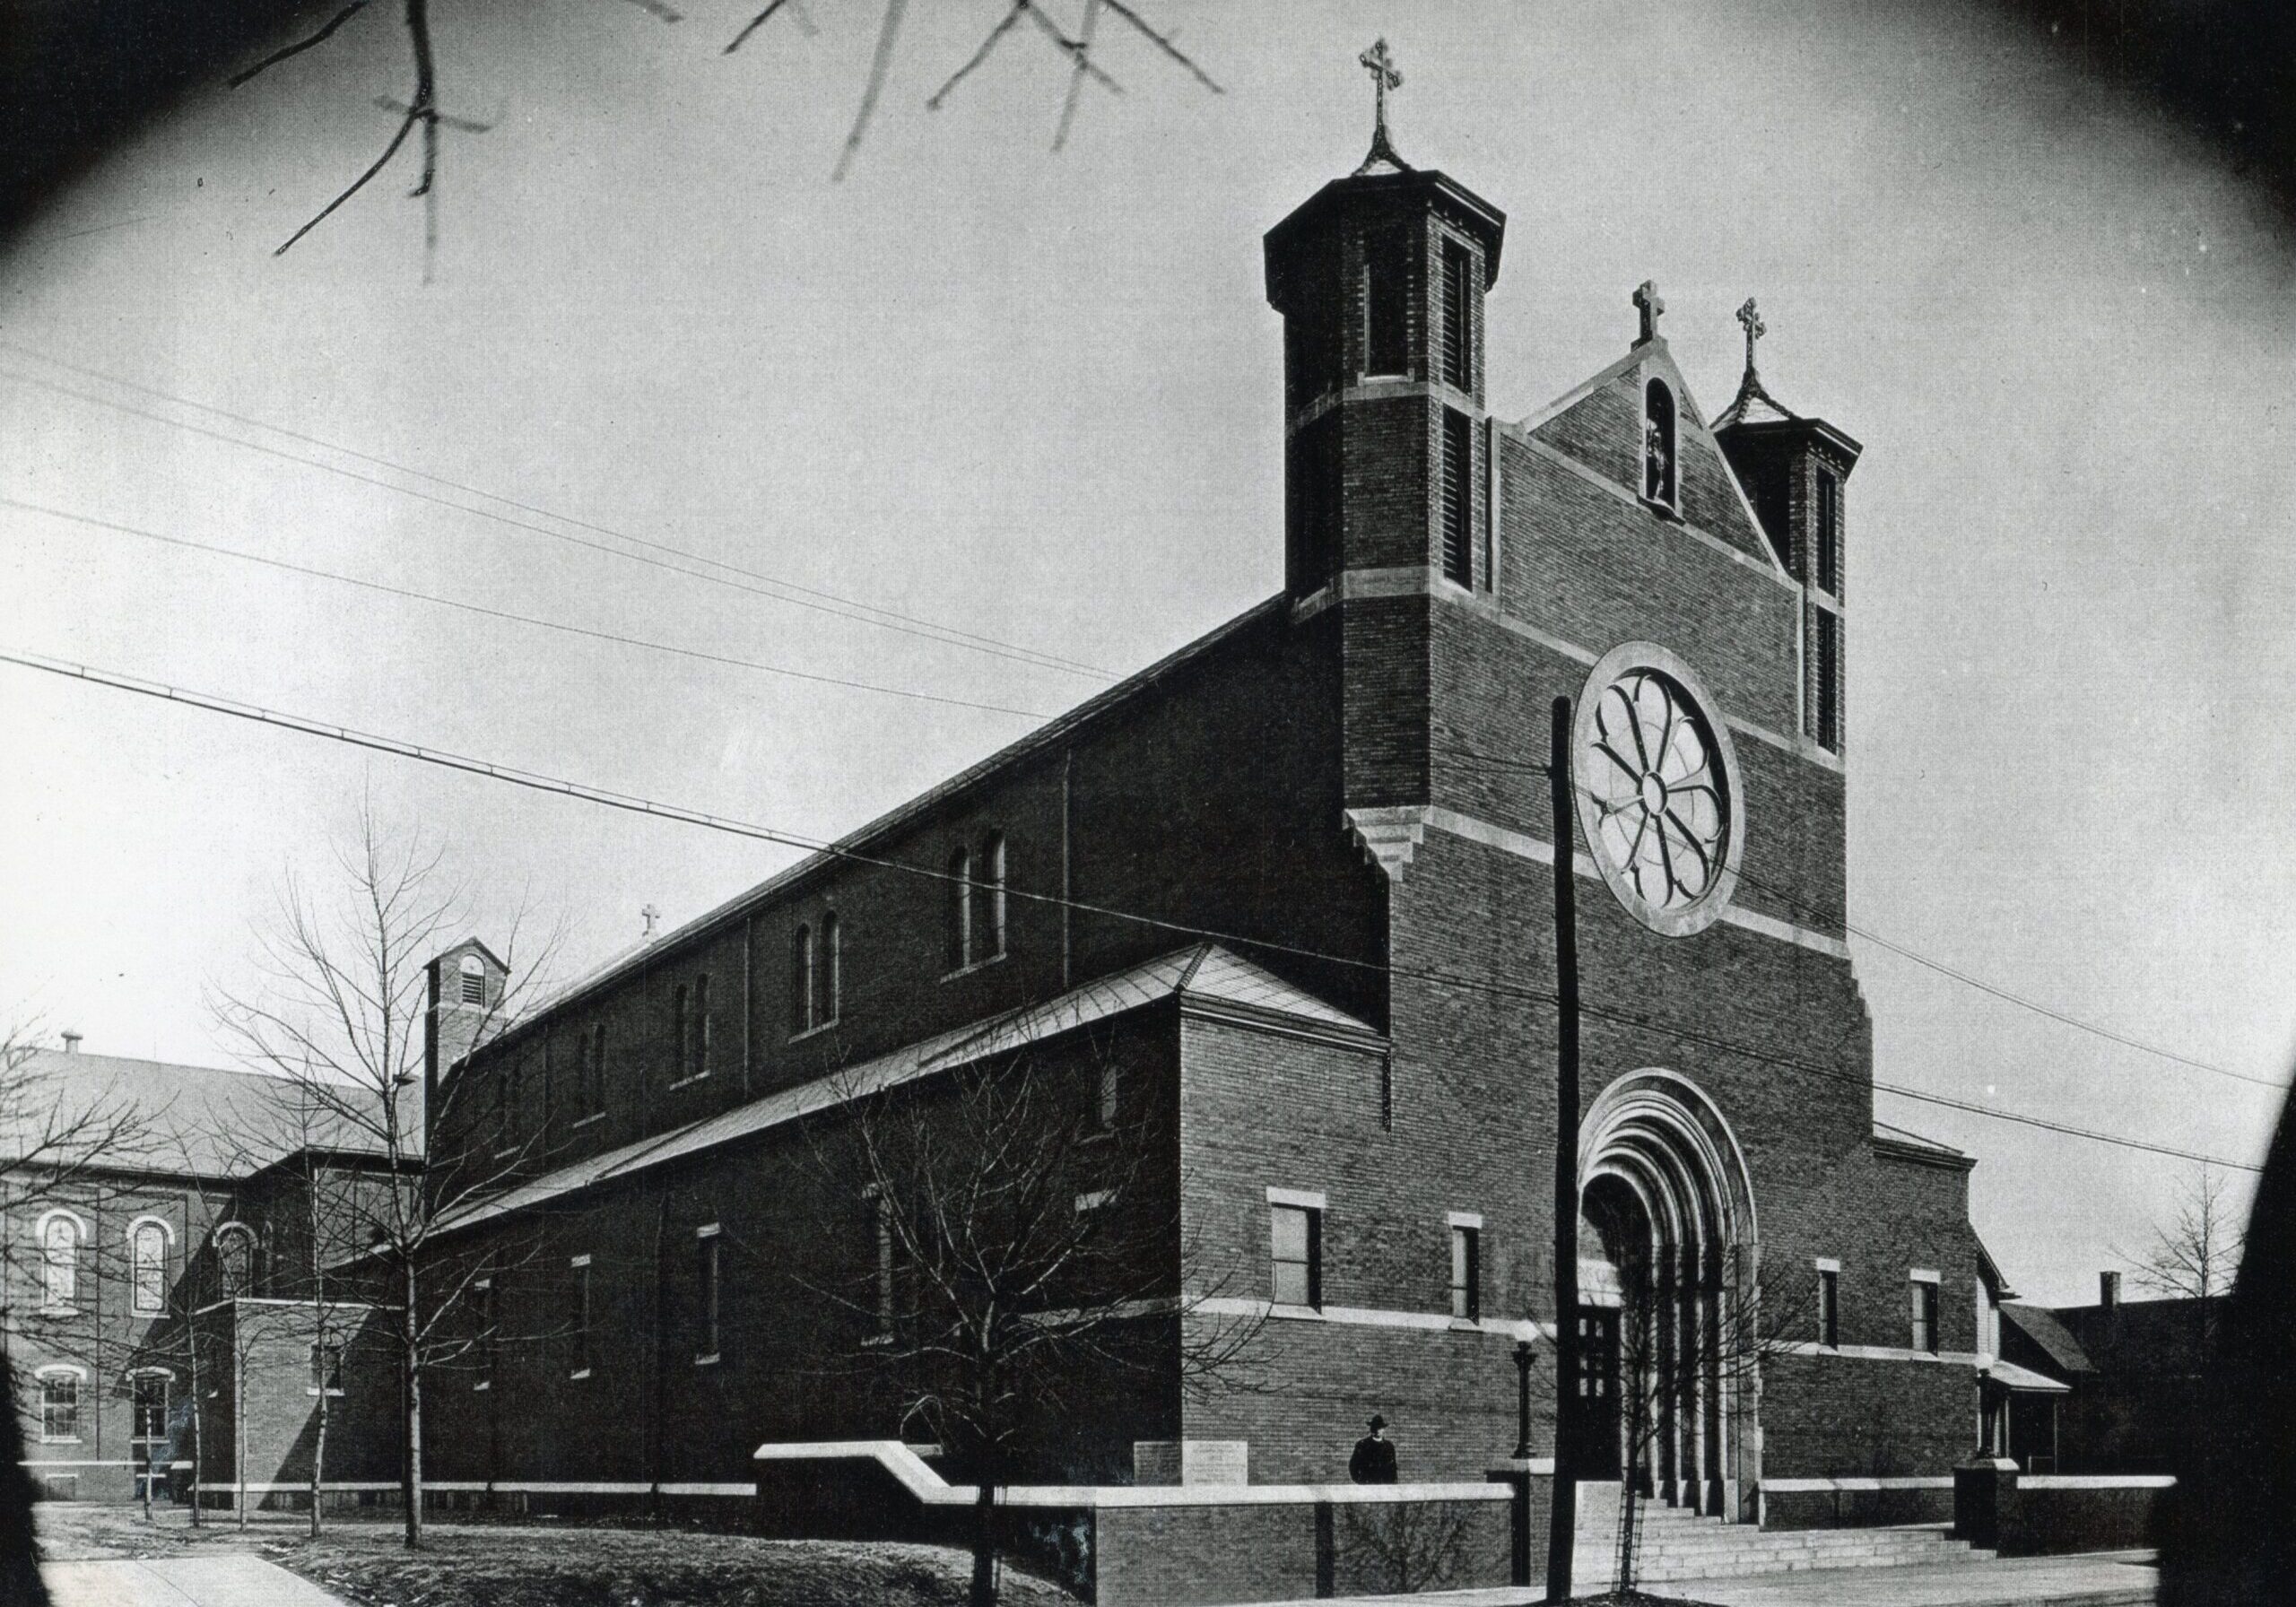 The church is shown in October 1924. Construction for the church was completed in the summer
of 1924. Submitted photo